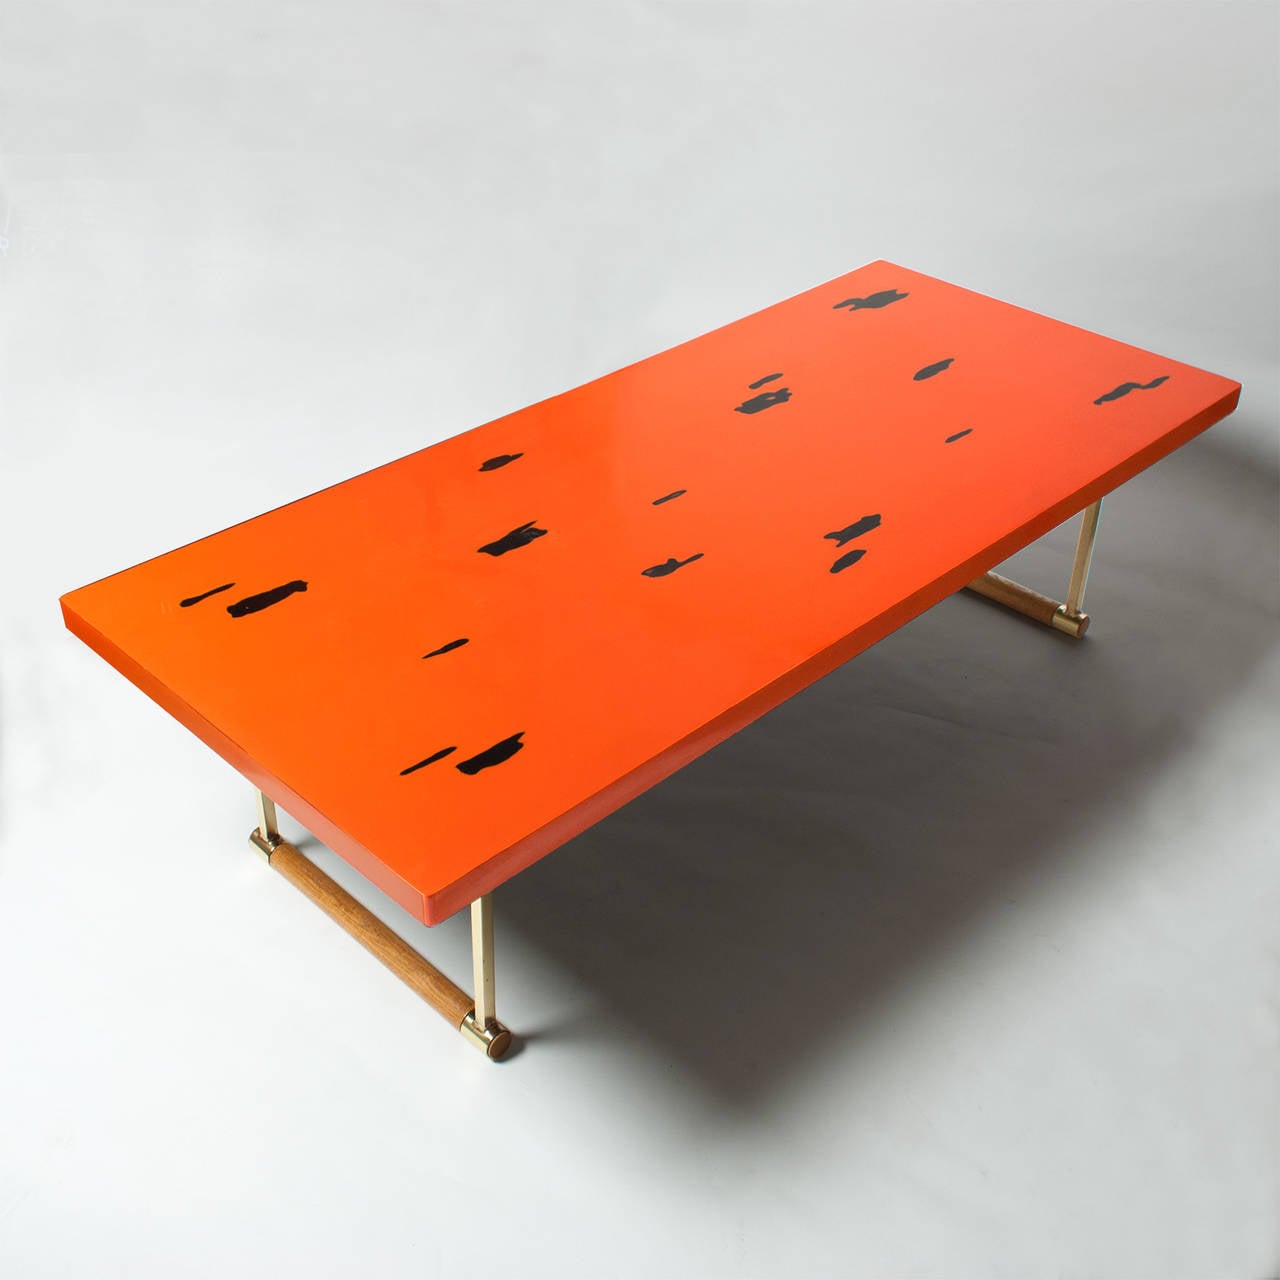 A stunning Japanese Mid-Century coffee table with a Minimalist design. The top is wood finished in the Japanese Negoro lacquer technique. Negoro is a century old technique in which many layers of red lacquer are applied to a black lacquer base.